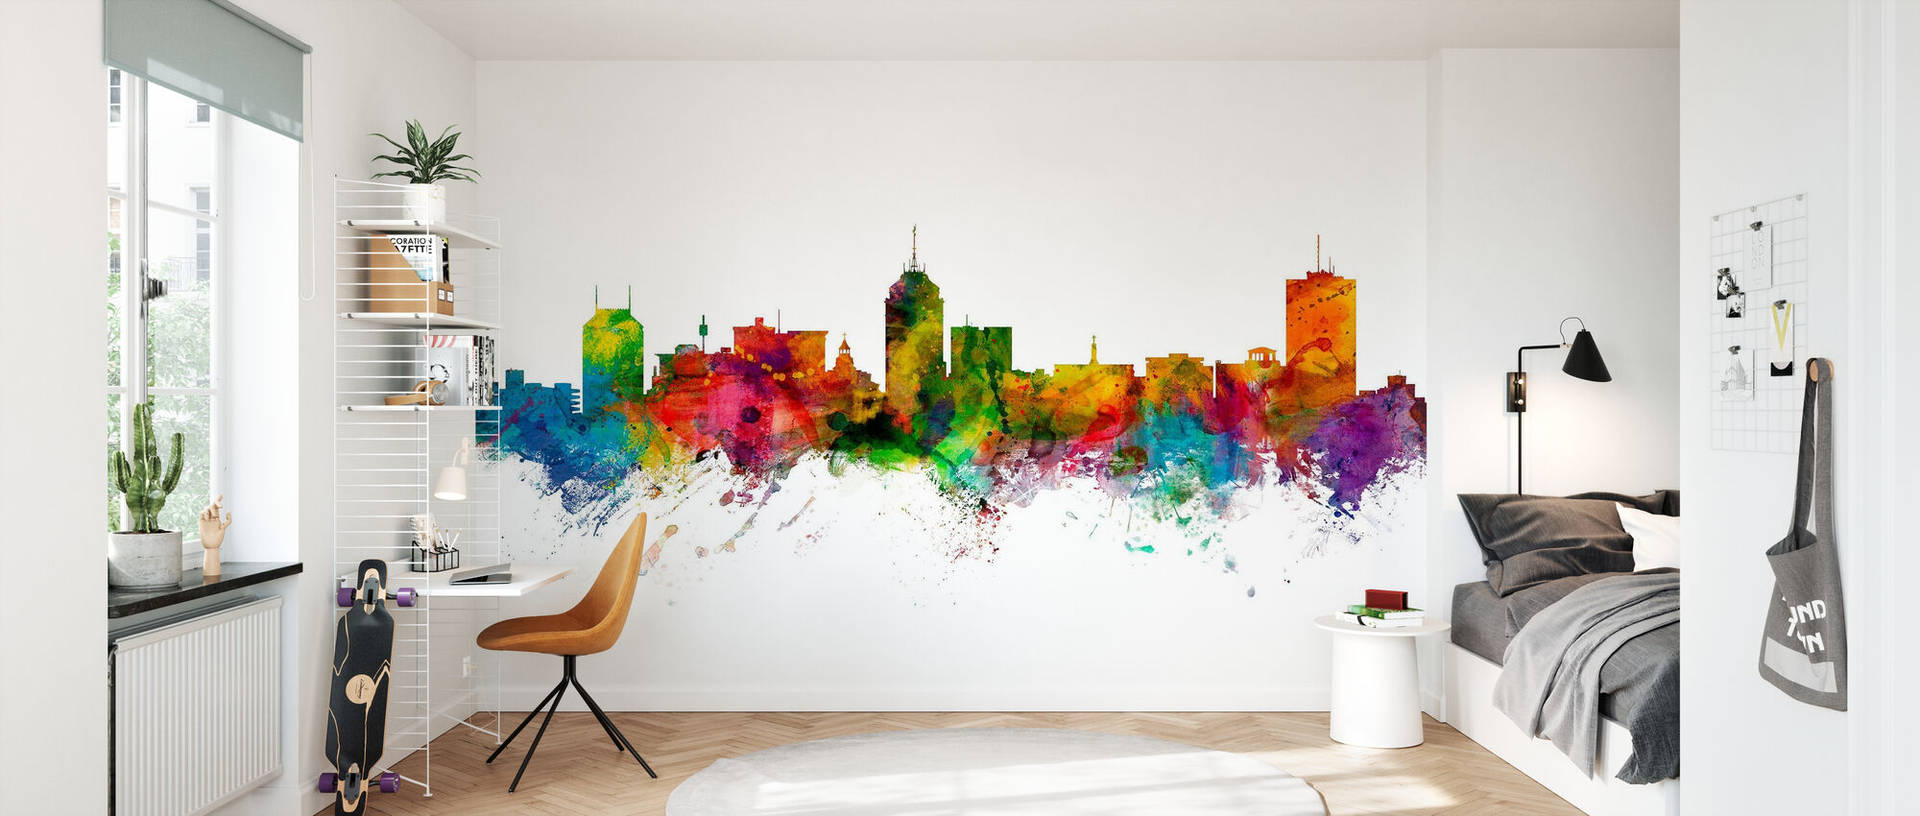 Fresno California Colorful Wall Mural Picture